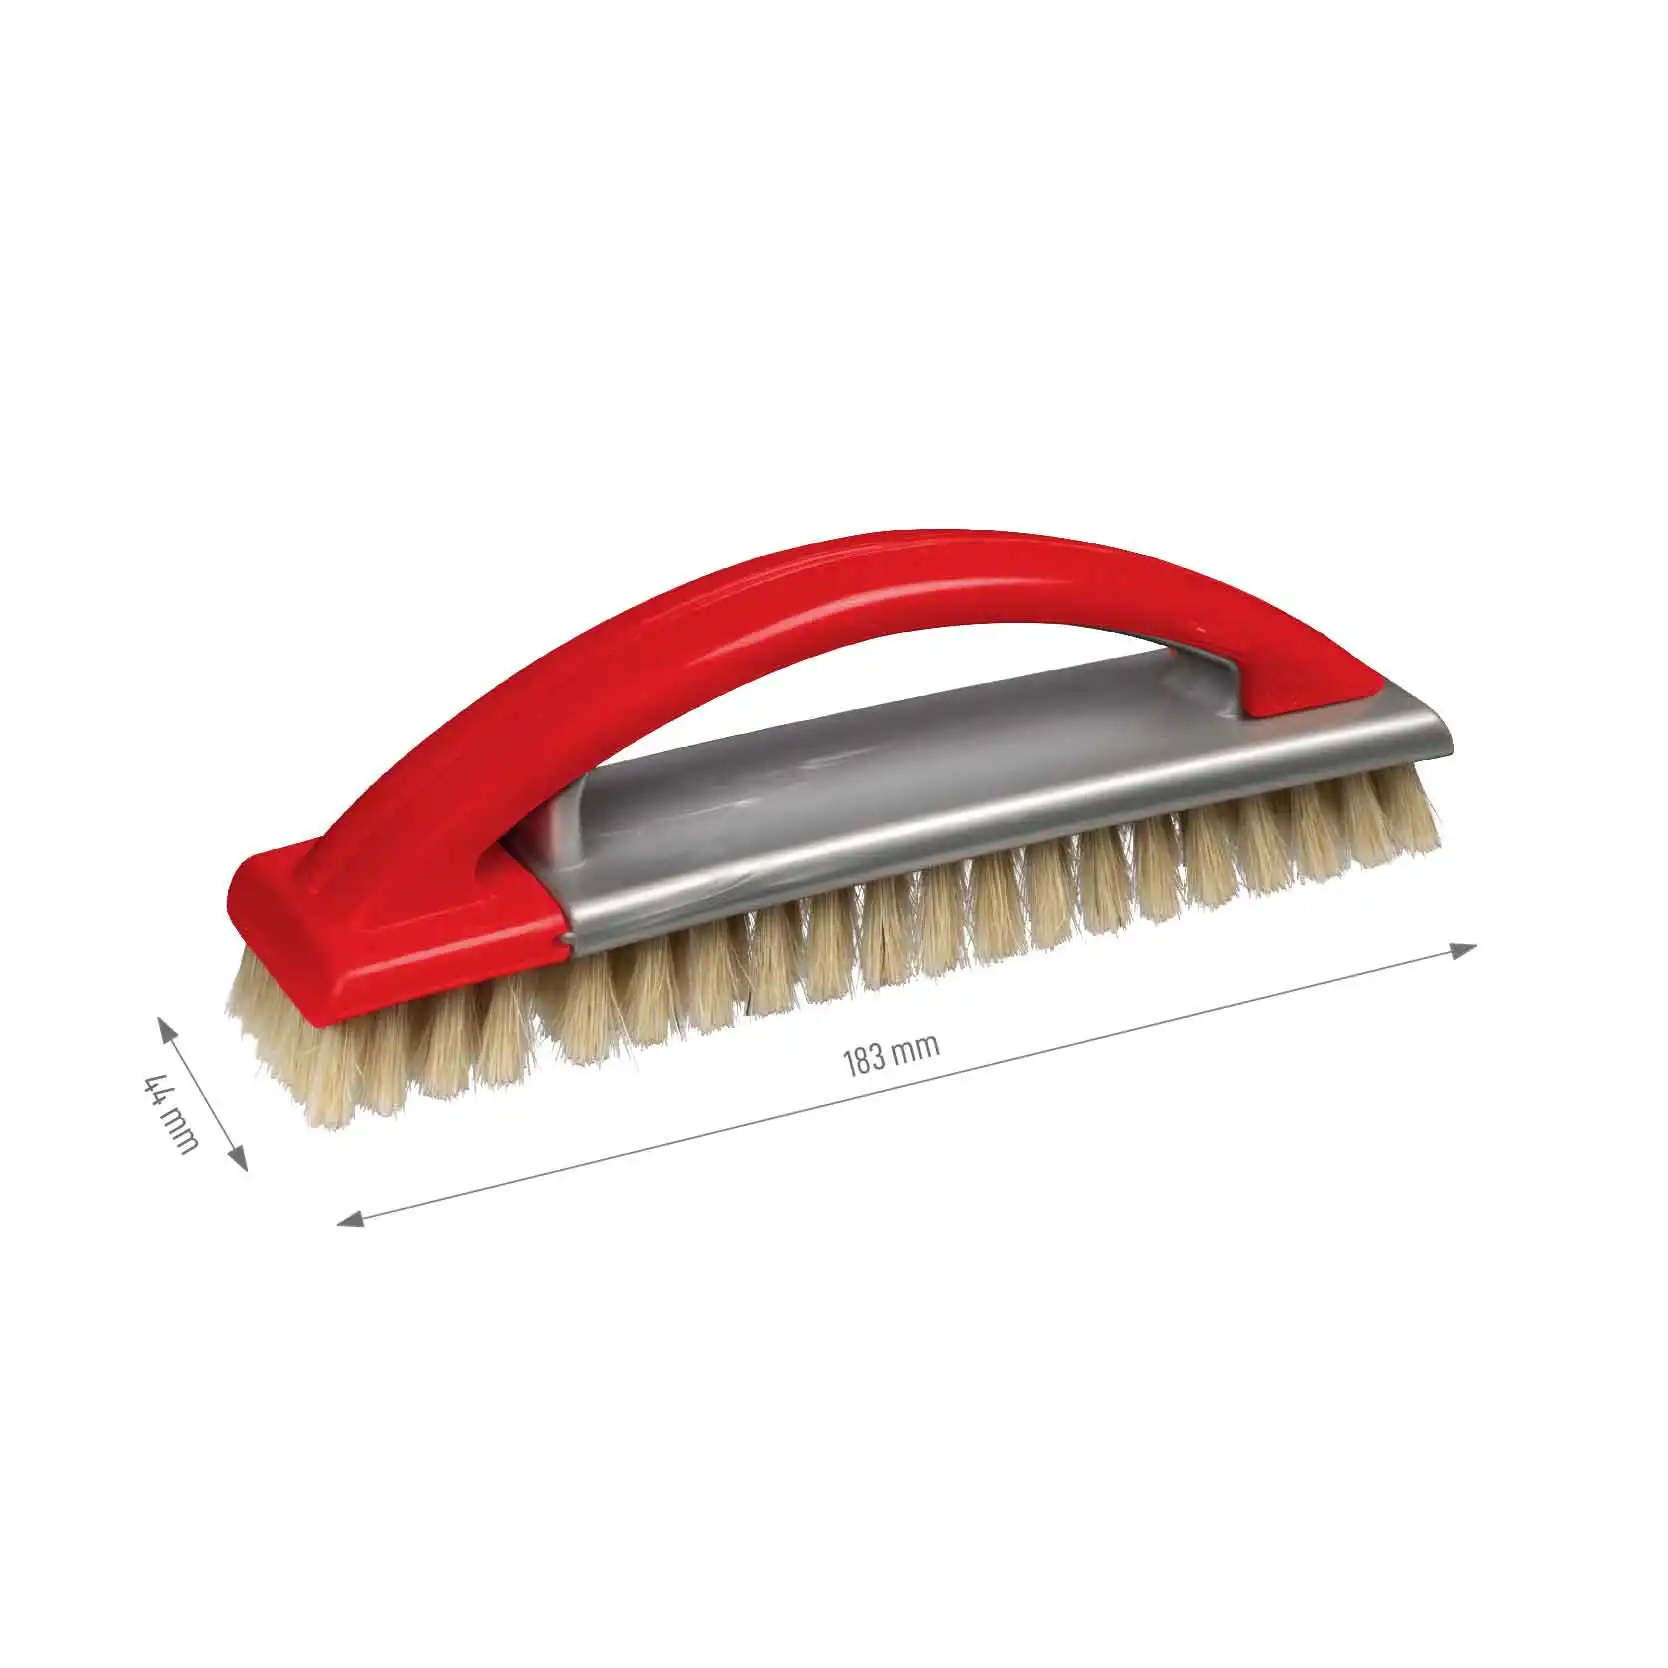 Double shoe brush hand grip model. Polypropylene block and white reinforced natural bristles. Made in Italy.